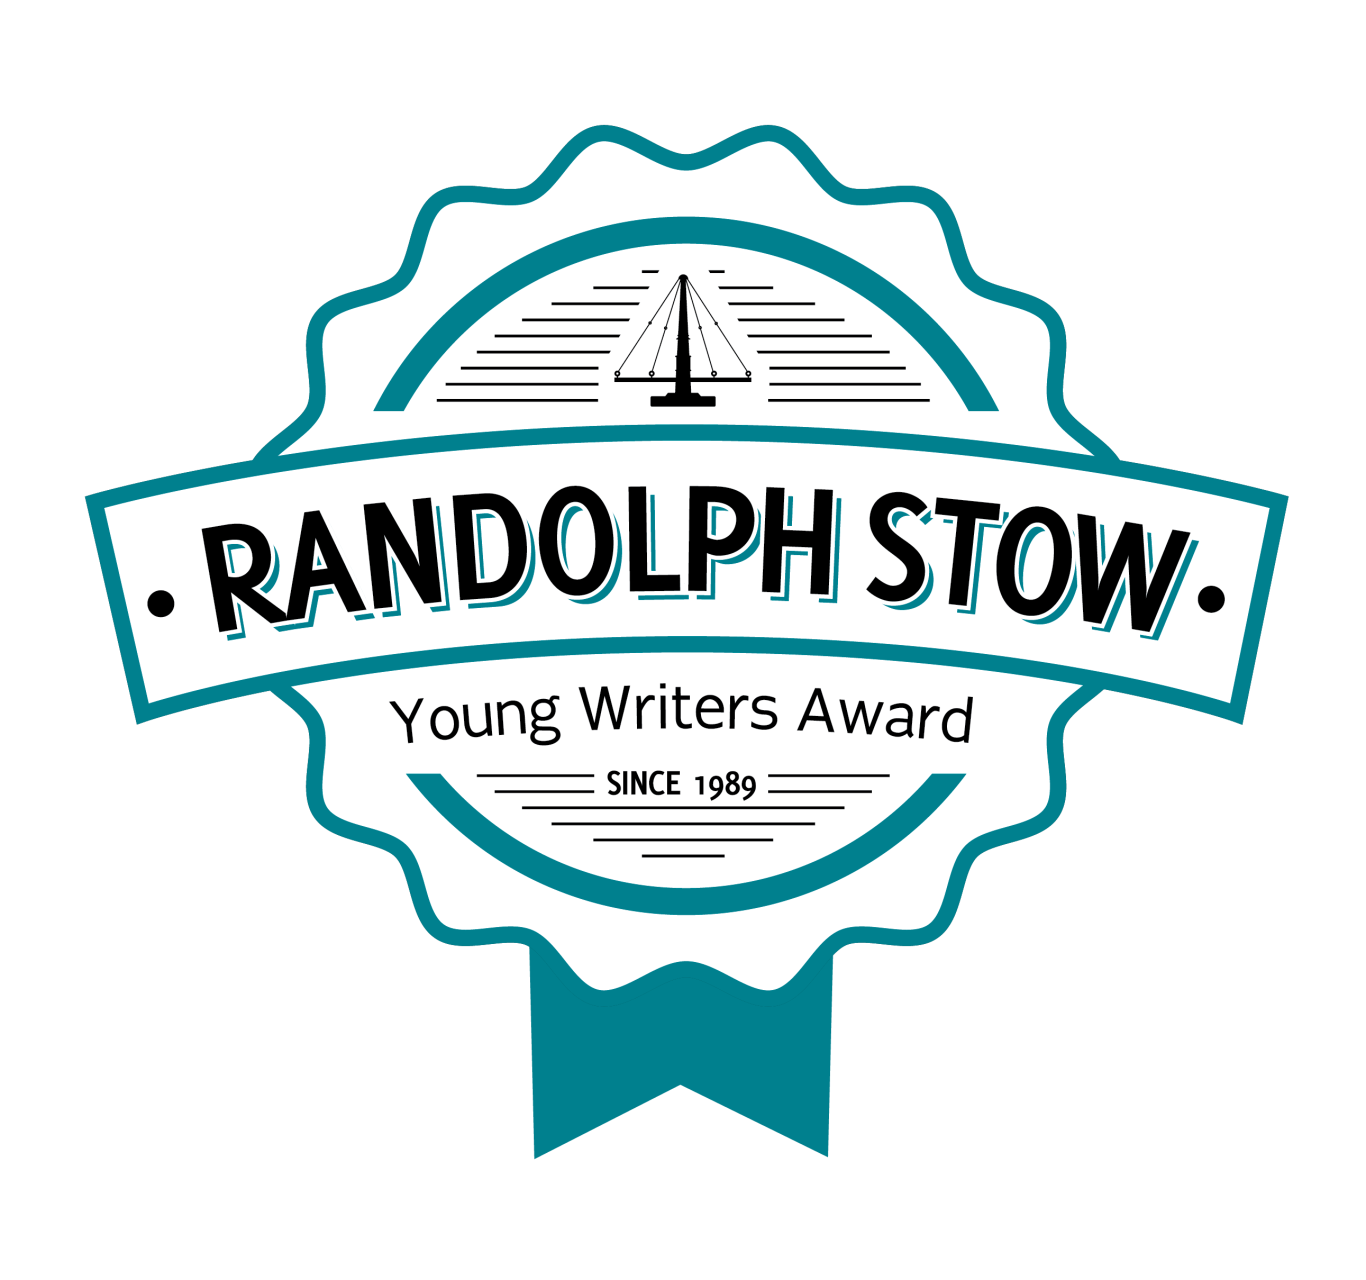 Randolph Stow Young Writers Award